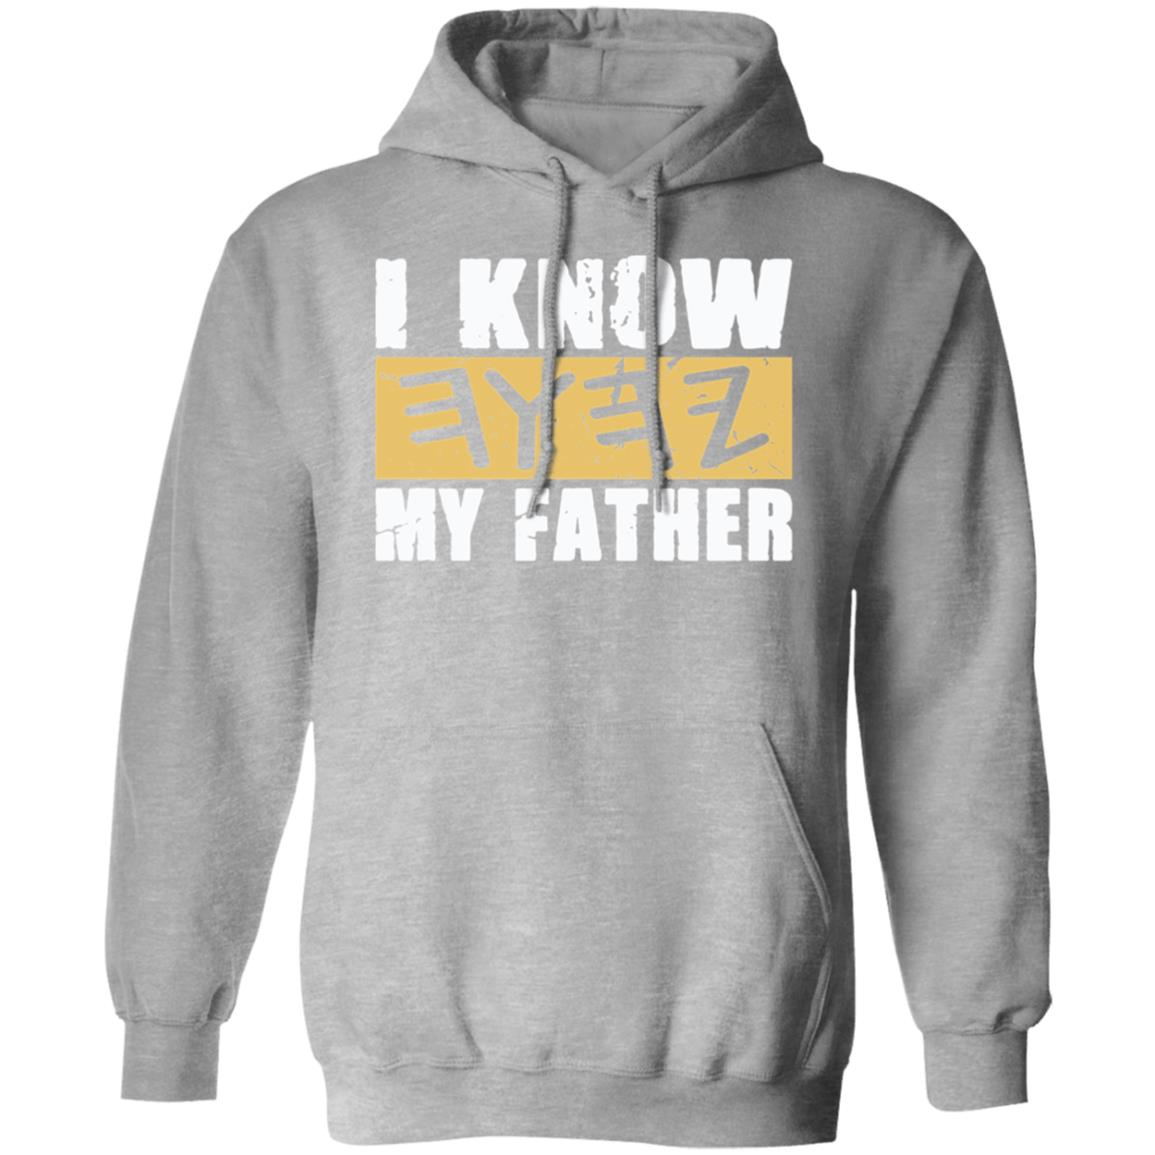 I KNOW MY FATHER Pullover Hoodie For Him For Her YAH